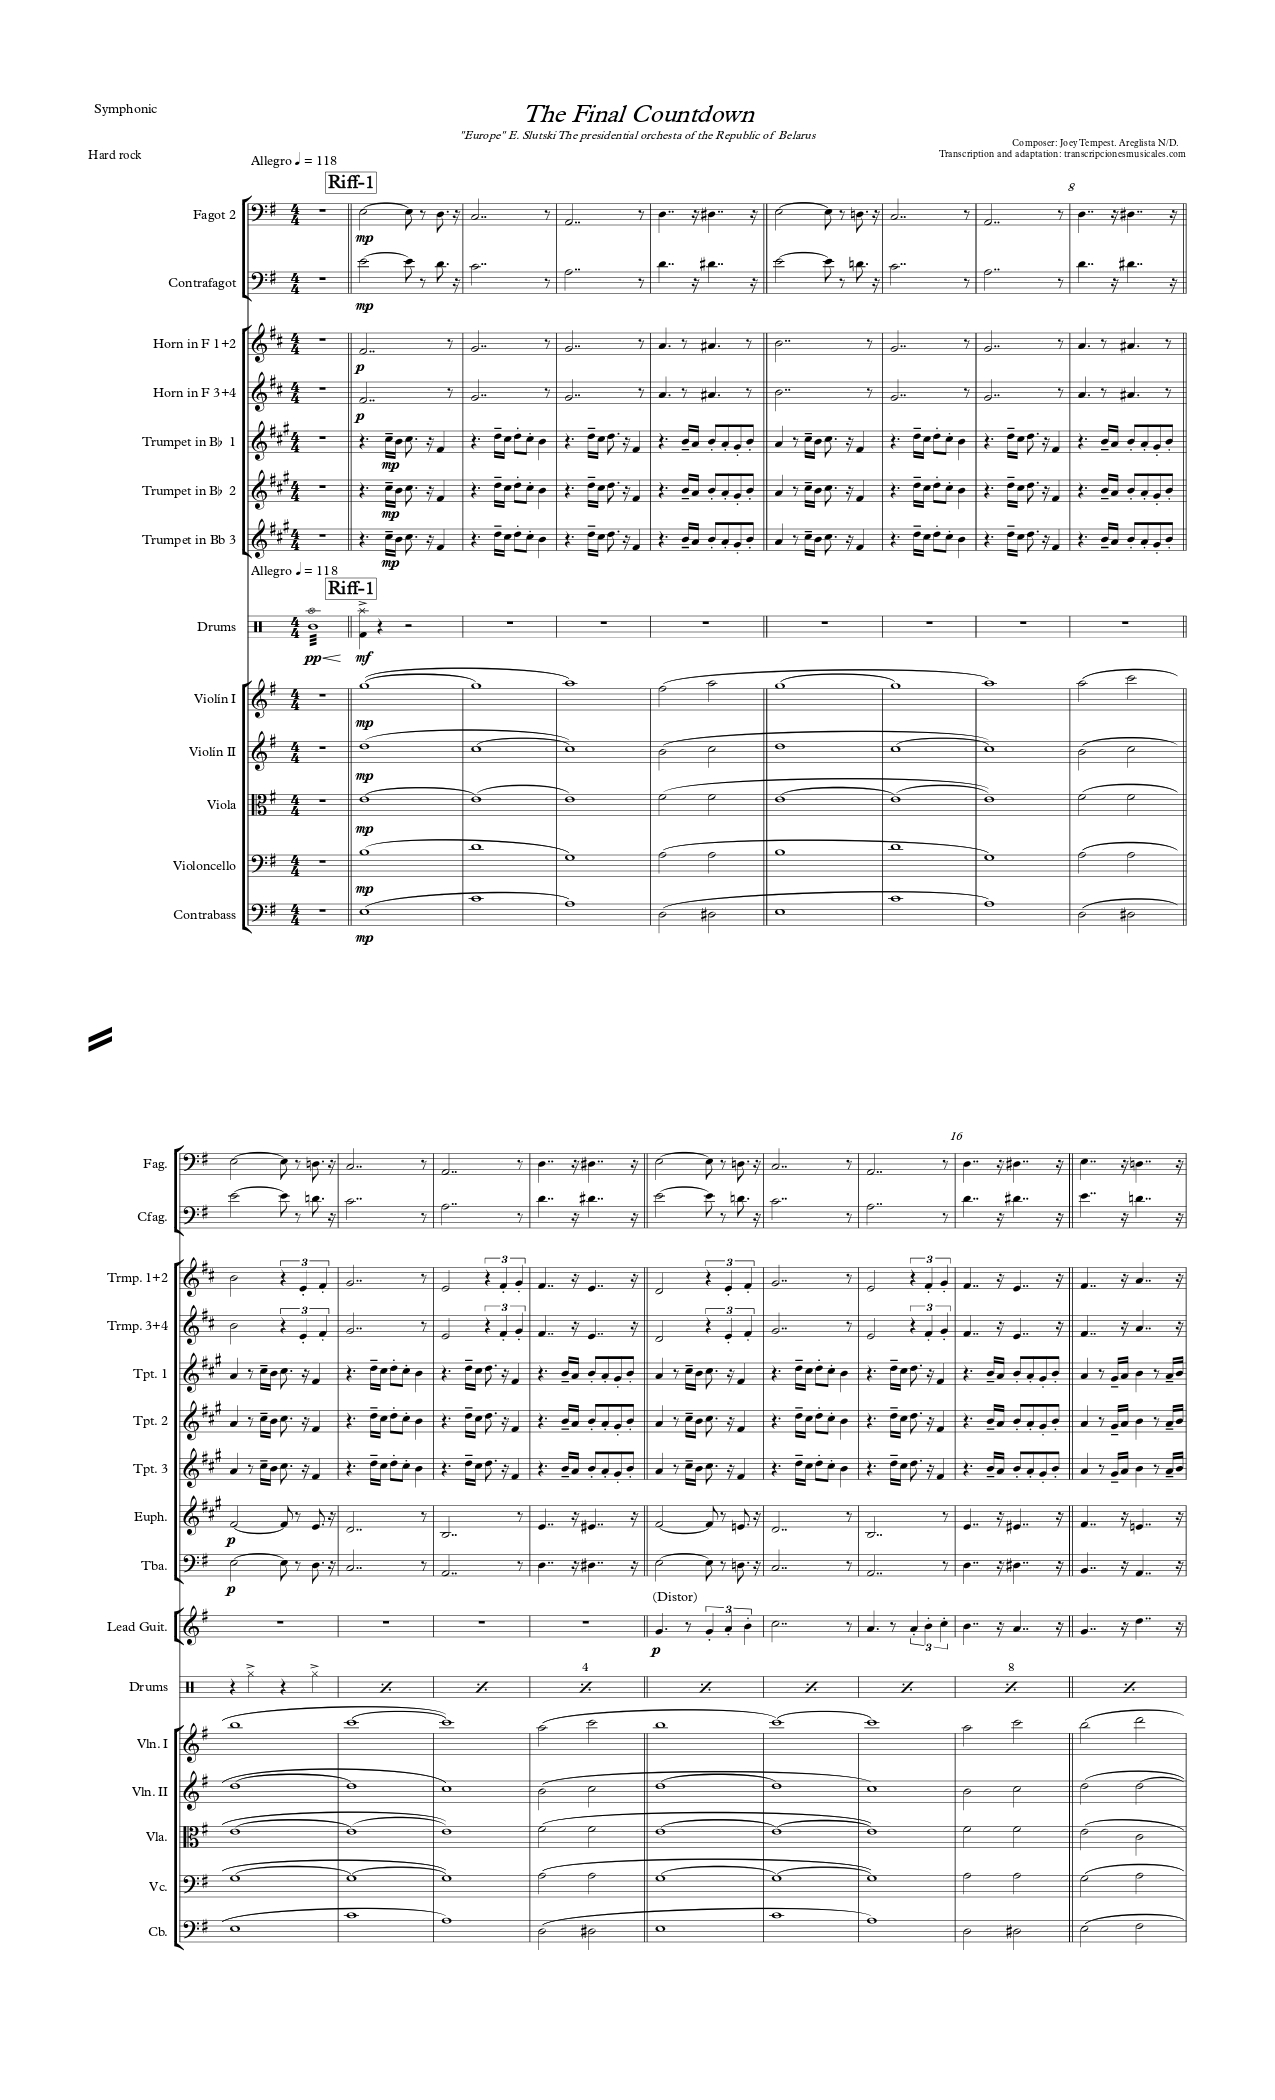 The final countdown - sheet music page 1